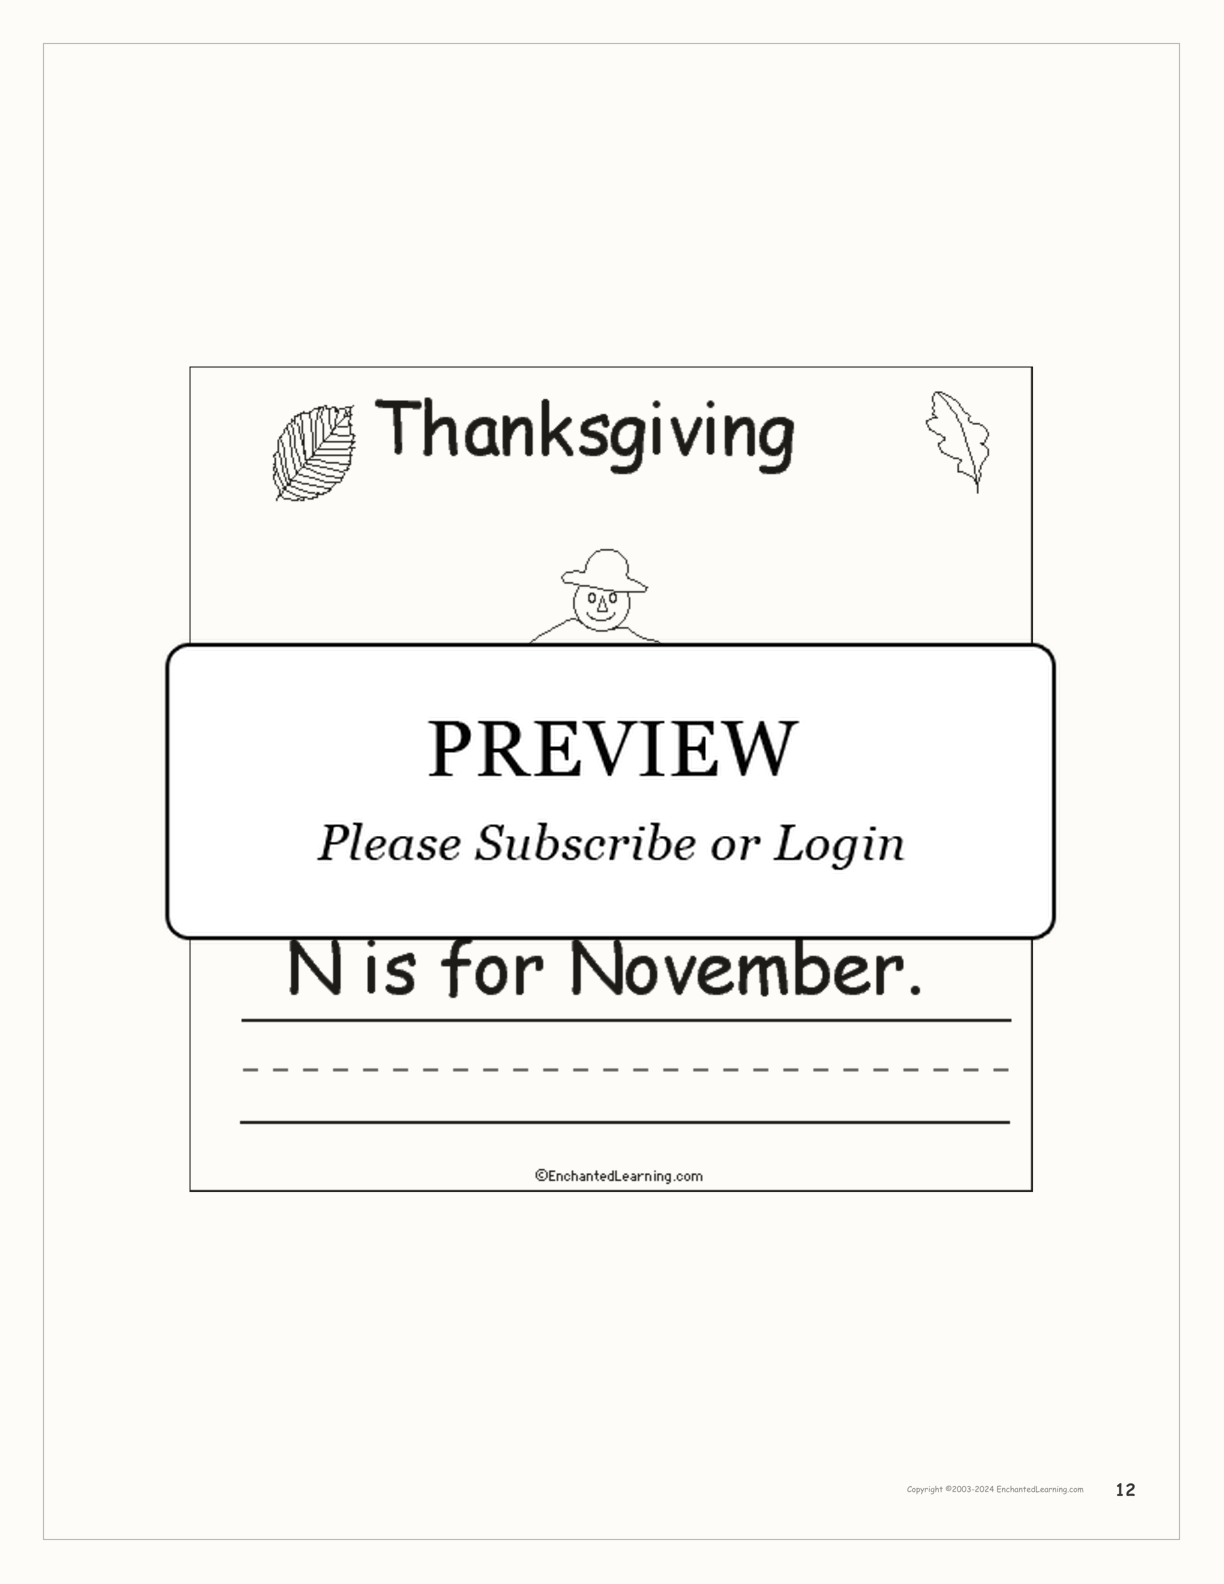 'Thanksgiving is for...' Book for Early Readers interactive printout page 12